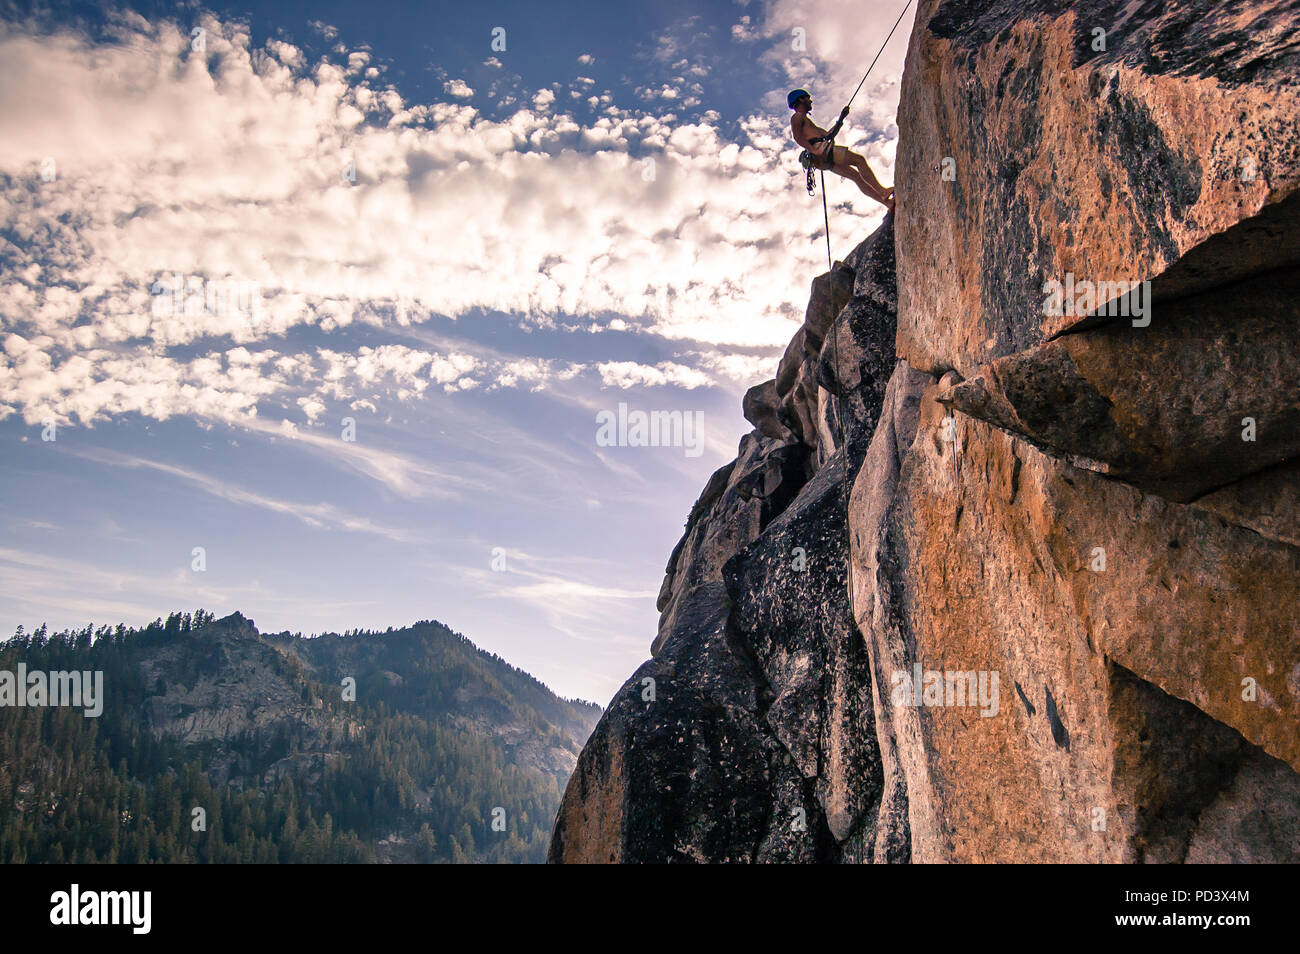 Young male rock climber sur roche, High Sierras, California, USA Banque D'Images